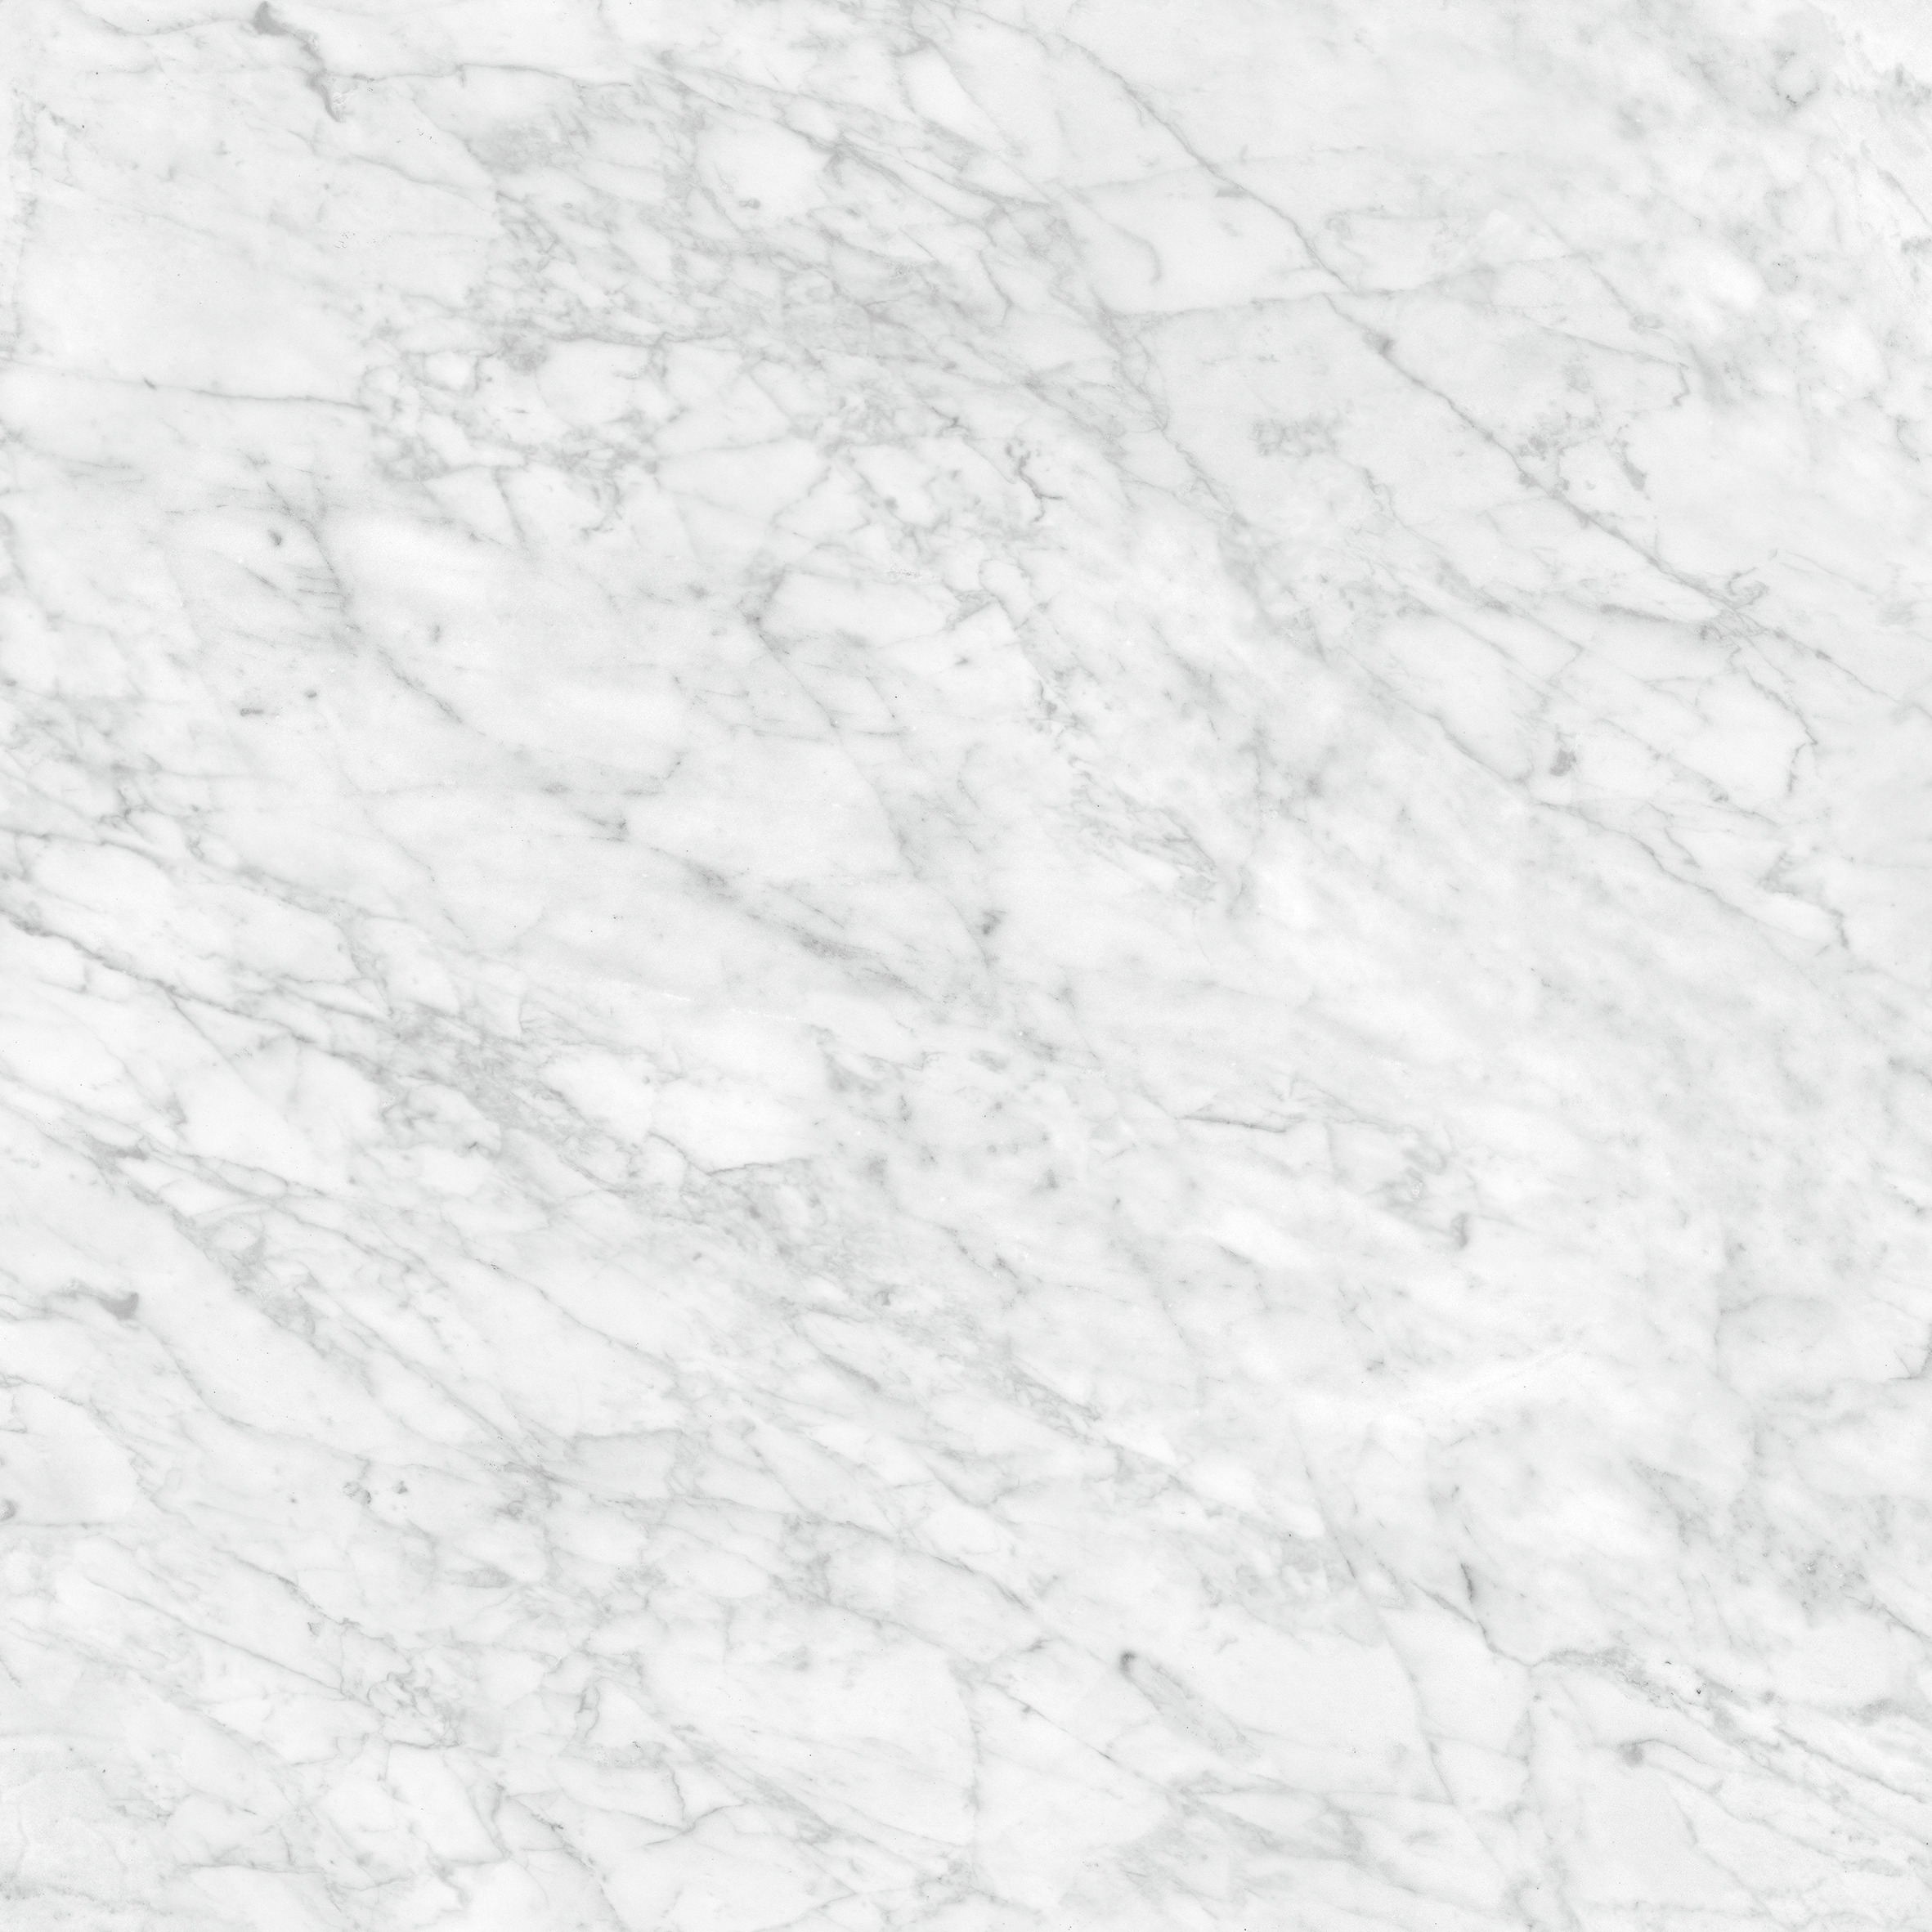 carrara gioia pattern glazed porcelain field tile from la marca anatolia collection distributed by surface group international polished finish rectified edge 32x32 square shape